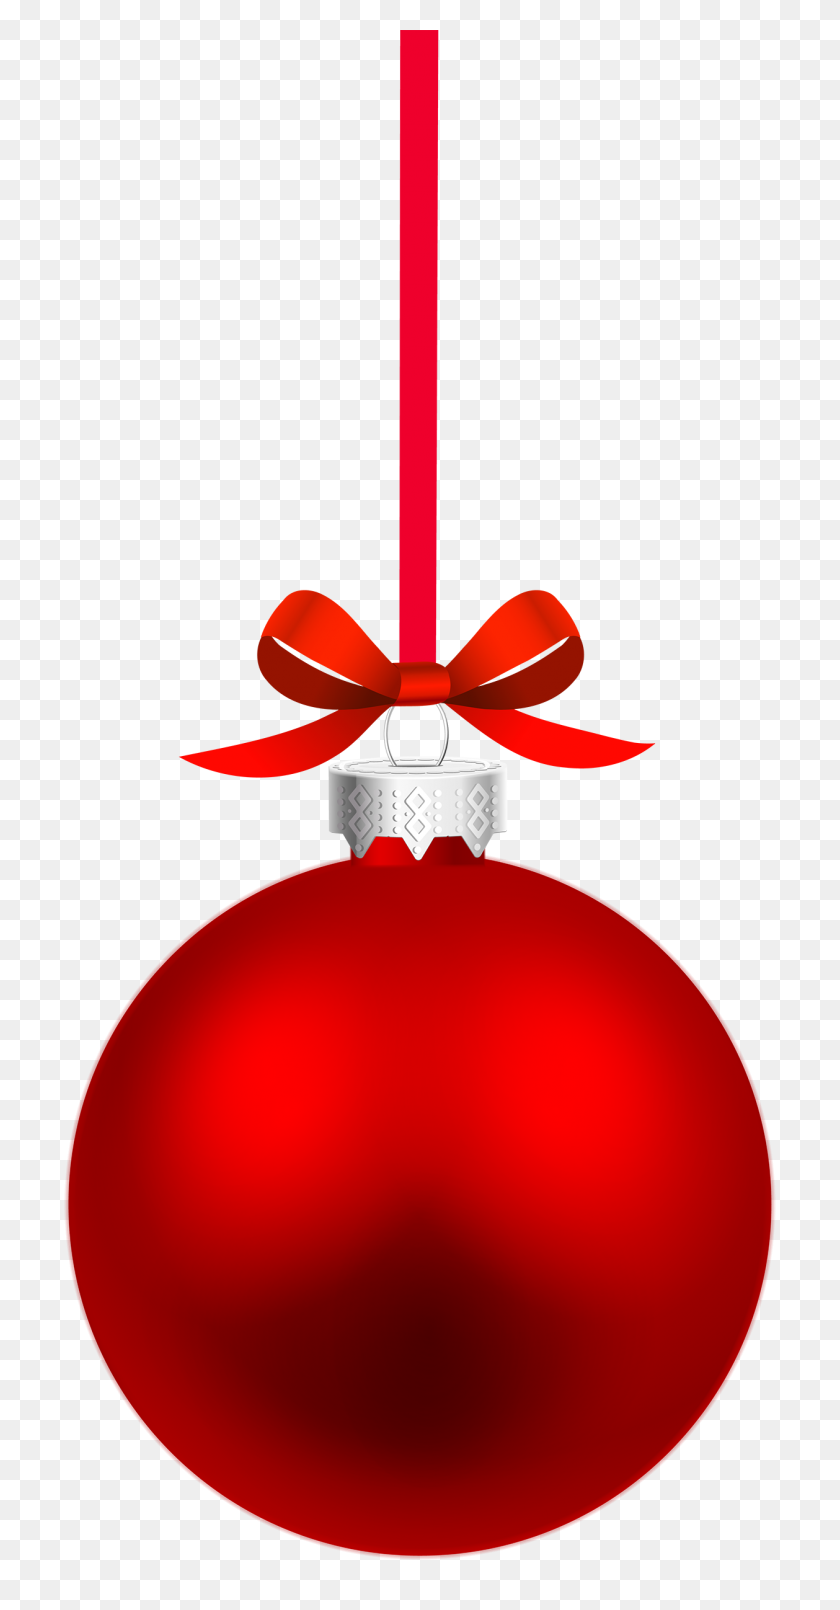 1258x2500 Hq Christmas Png Transparent Christmas Images - Christmas Decorations PNG